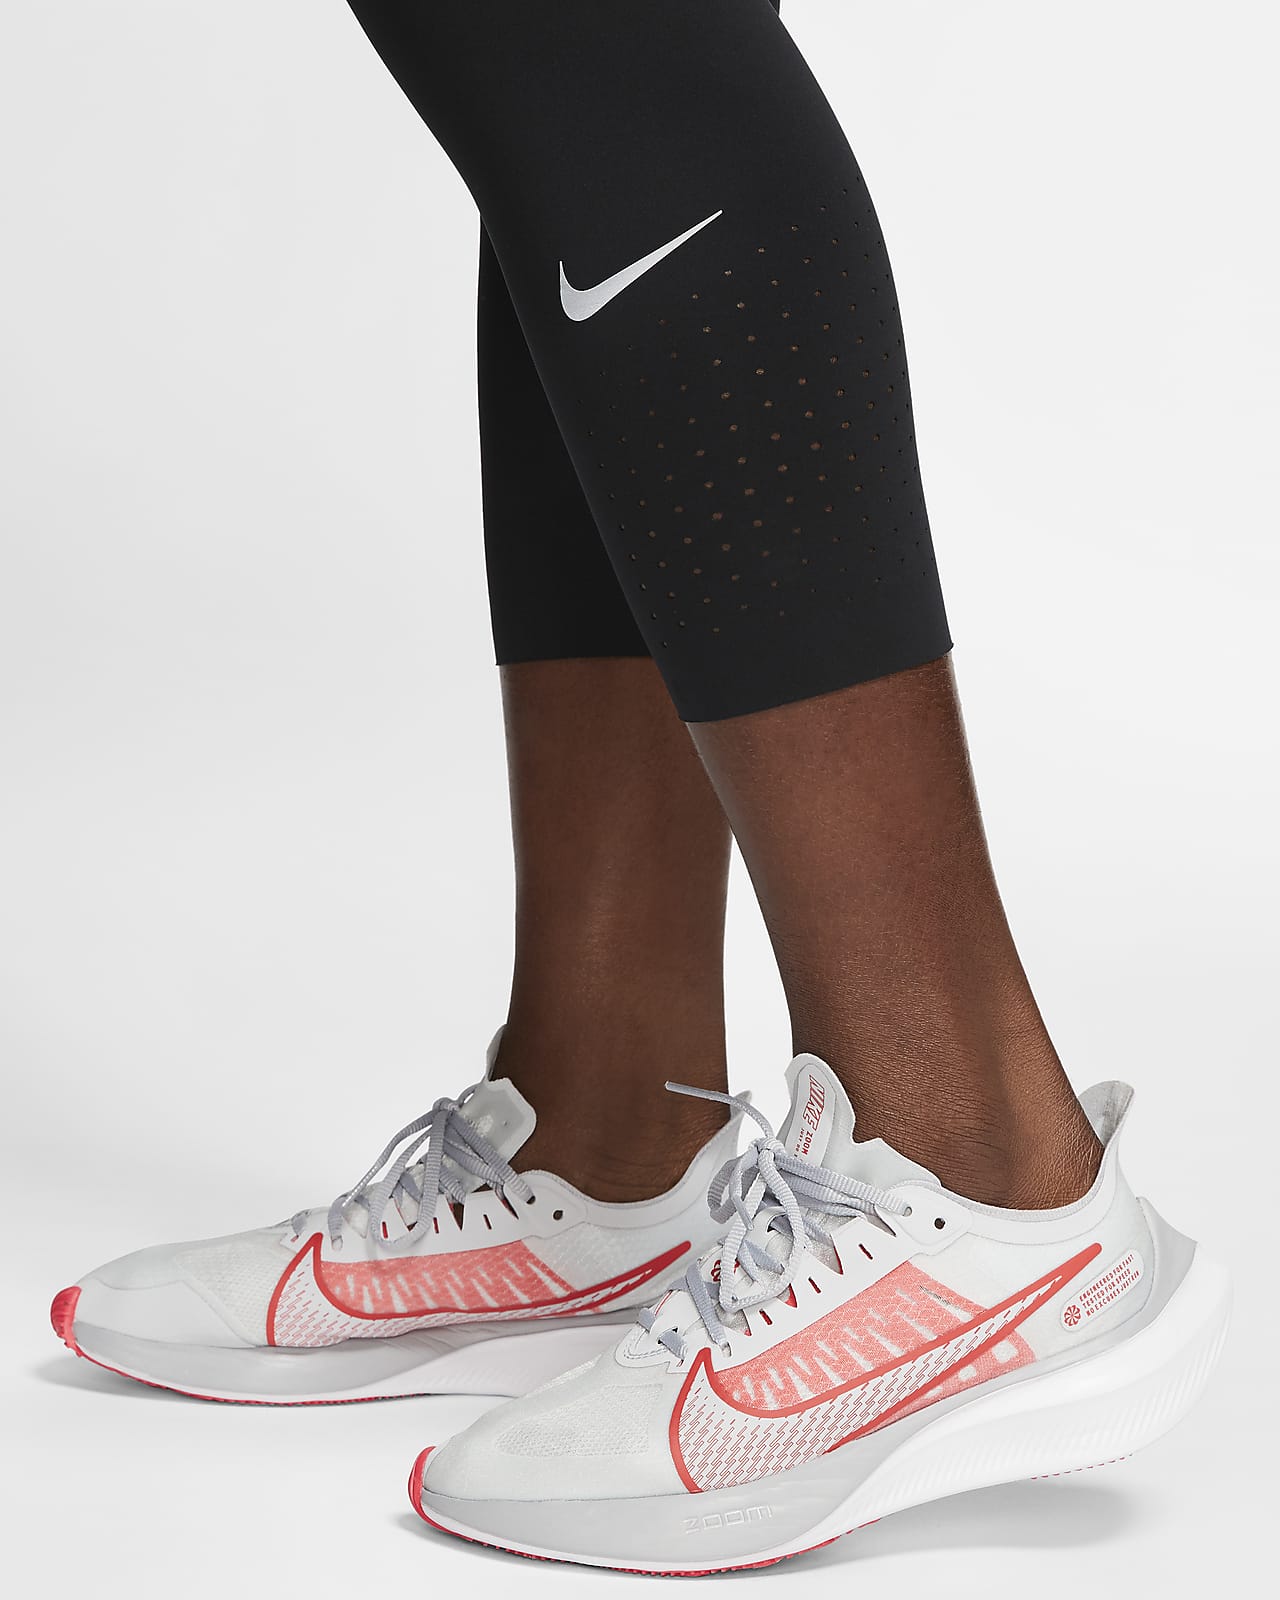 nike women's epic lux cropped running tights